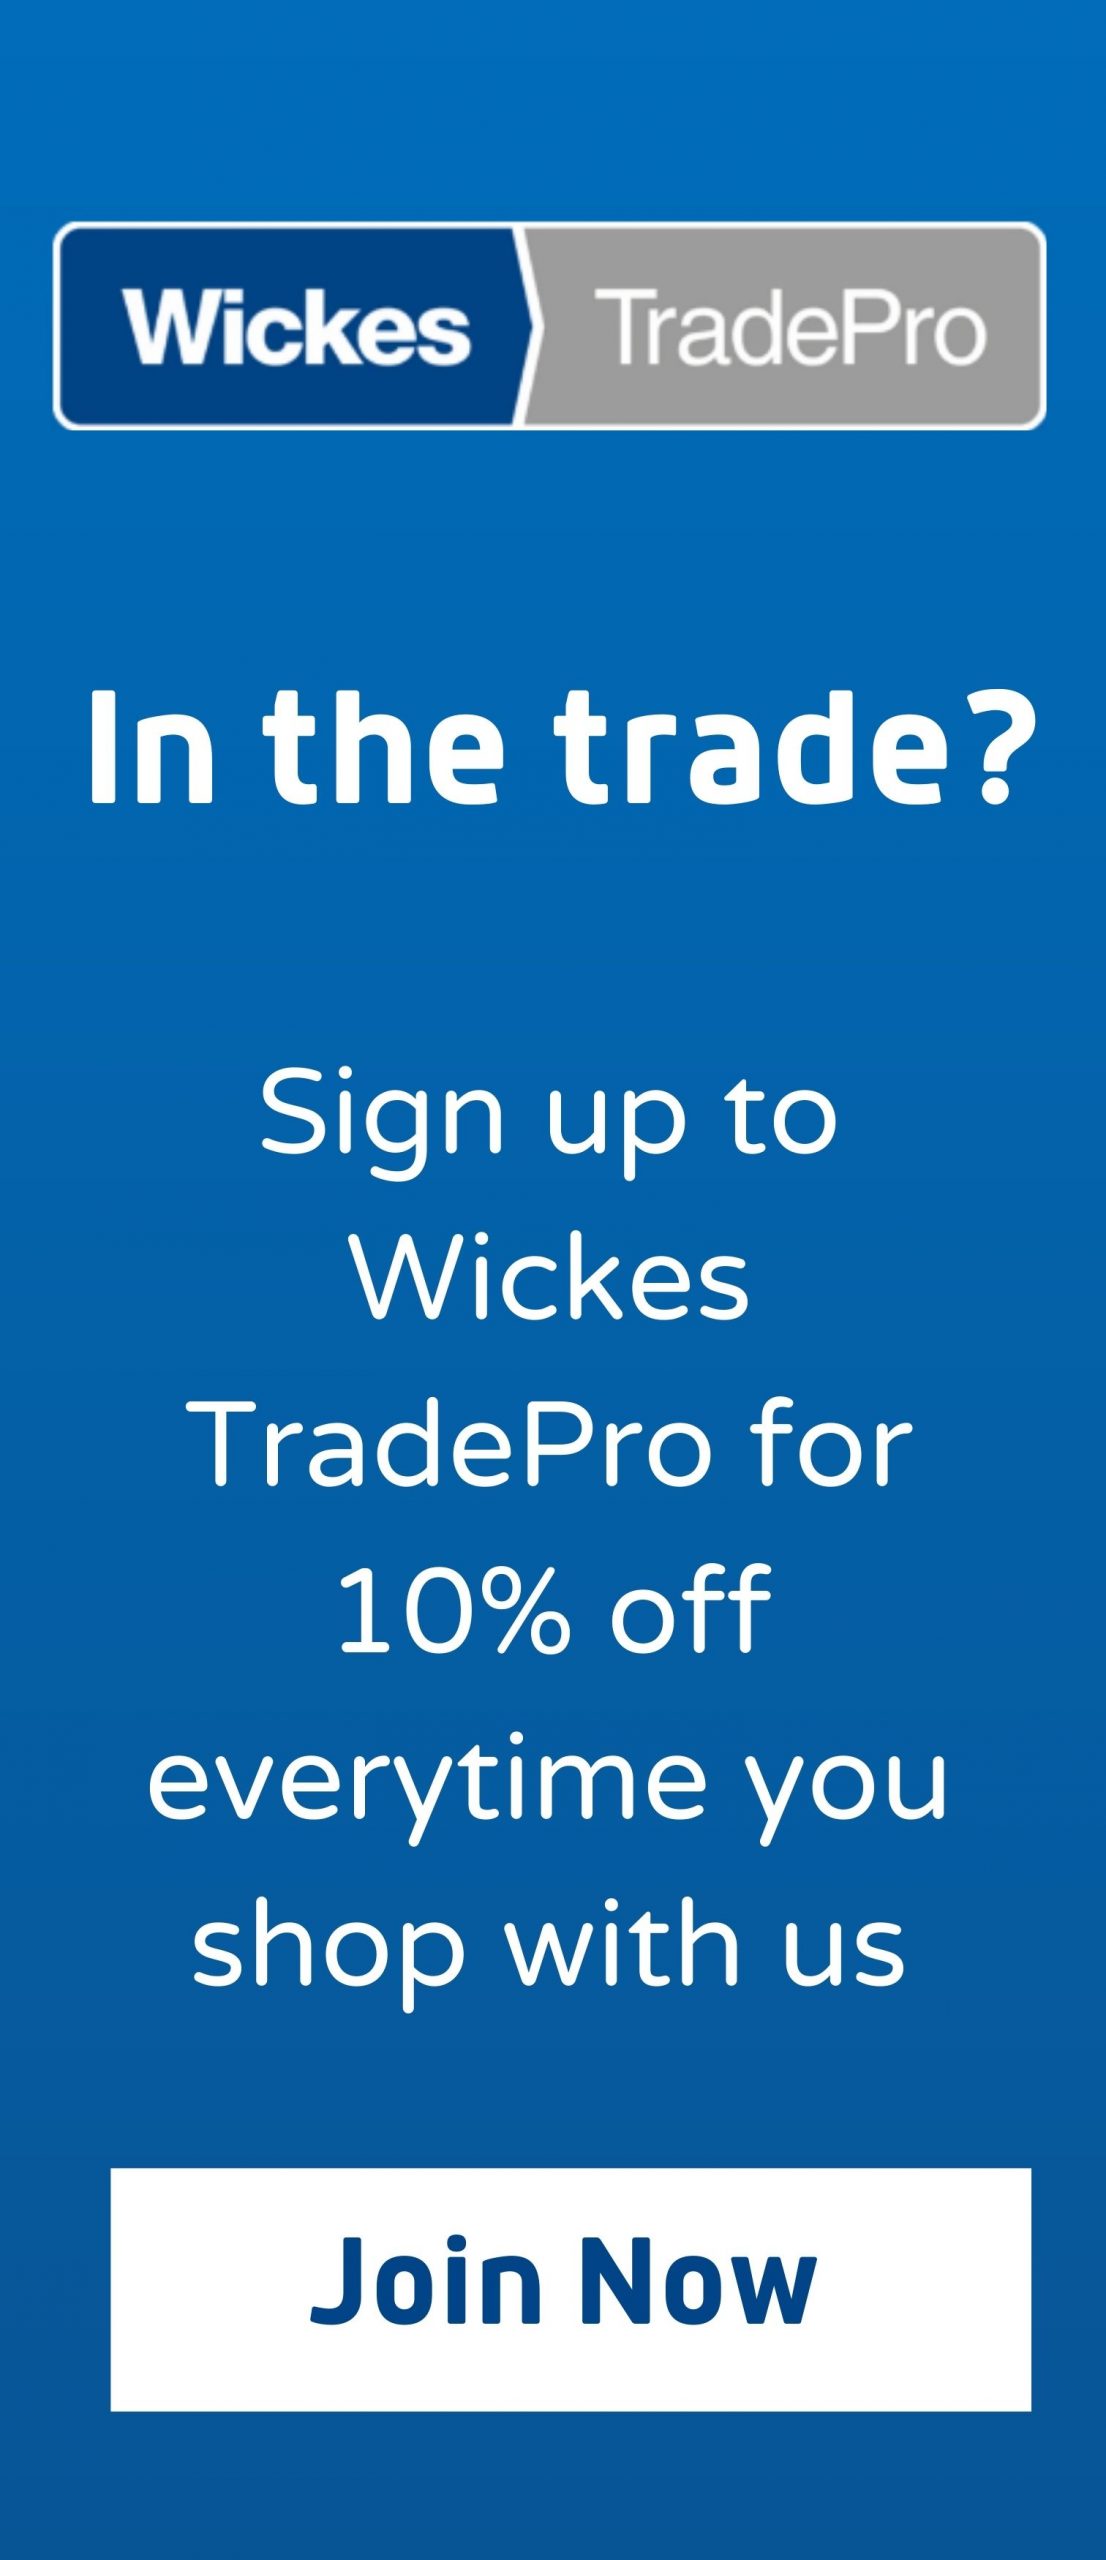 Wickes Ad (1512 × 3500 px) (2)